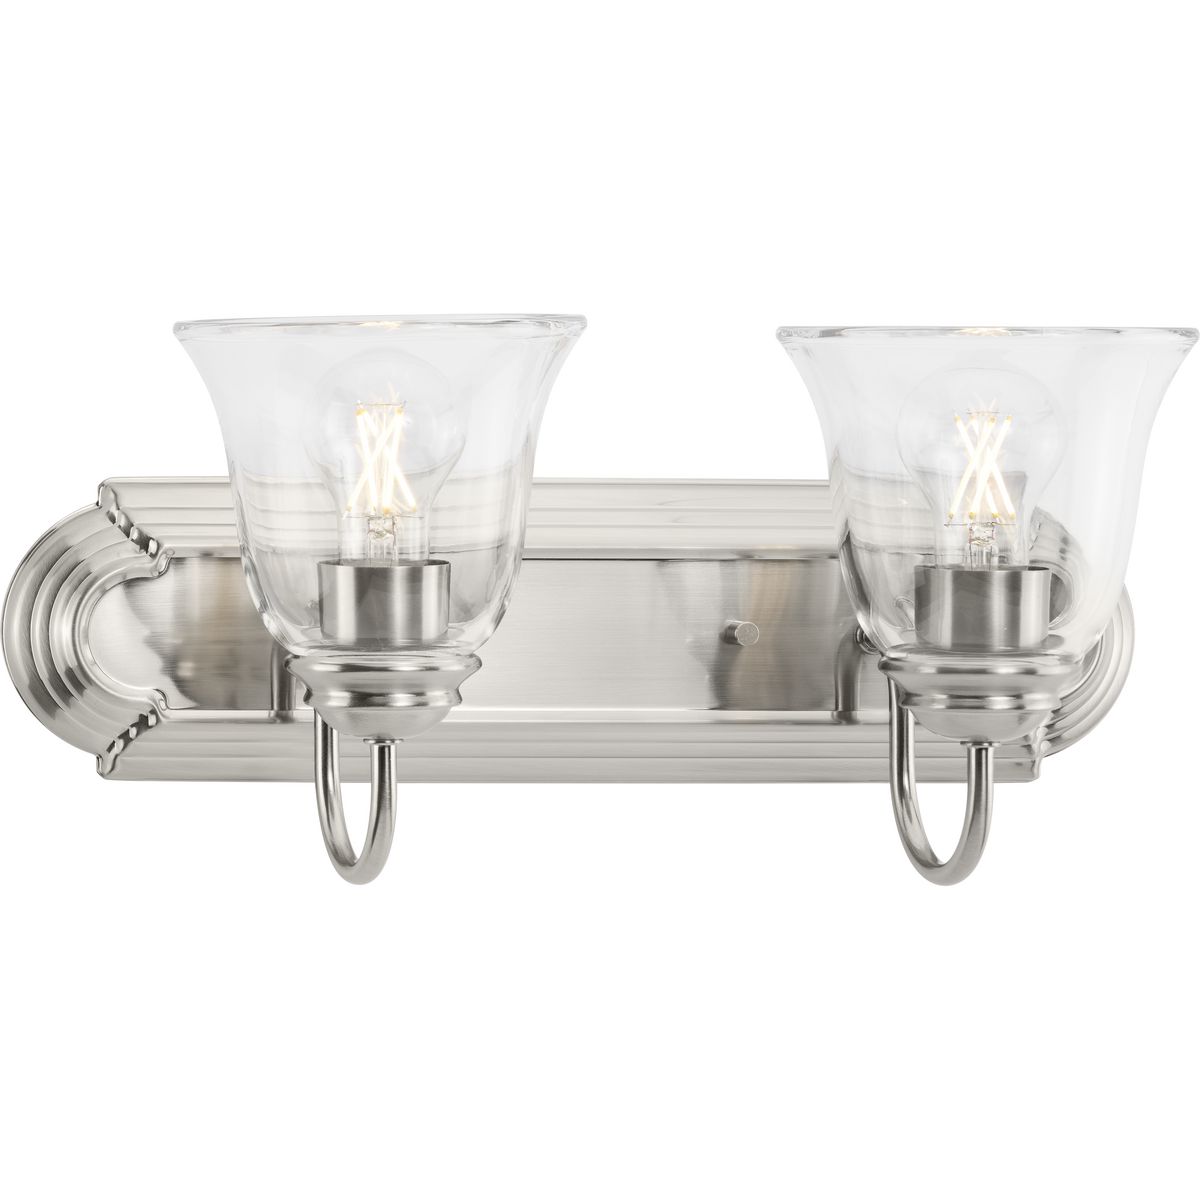 Two-Light Brushed Nickel Transitional Bath and Vanity Light with Clear Glass for Bathroom